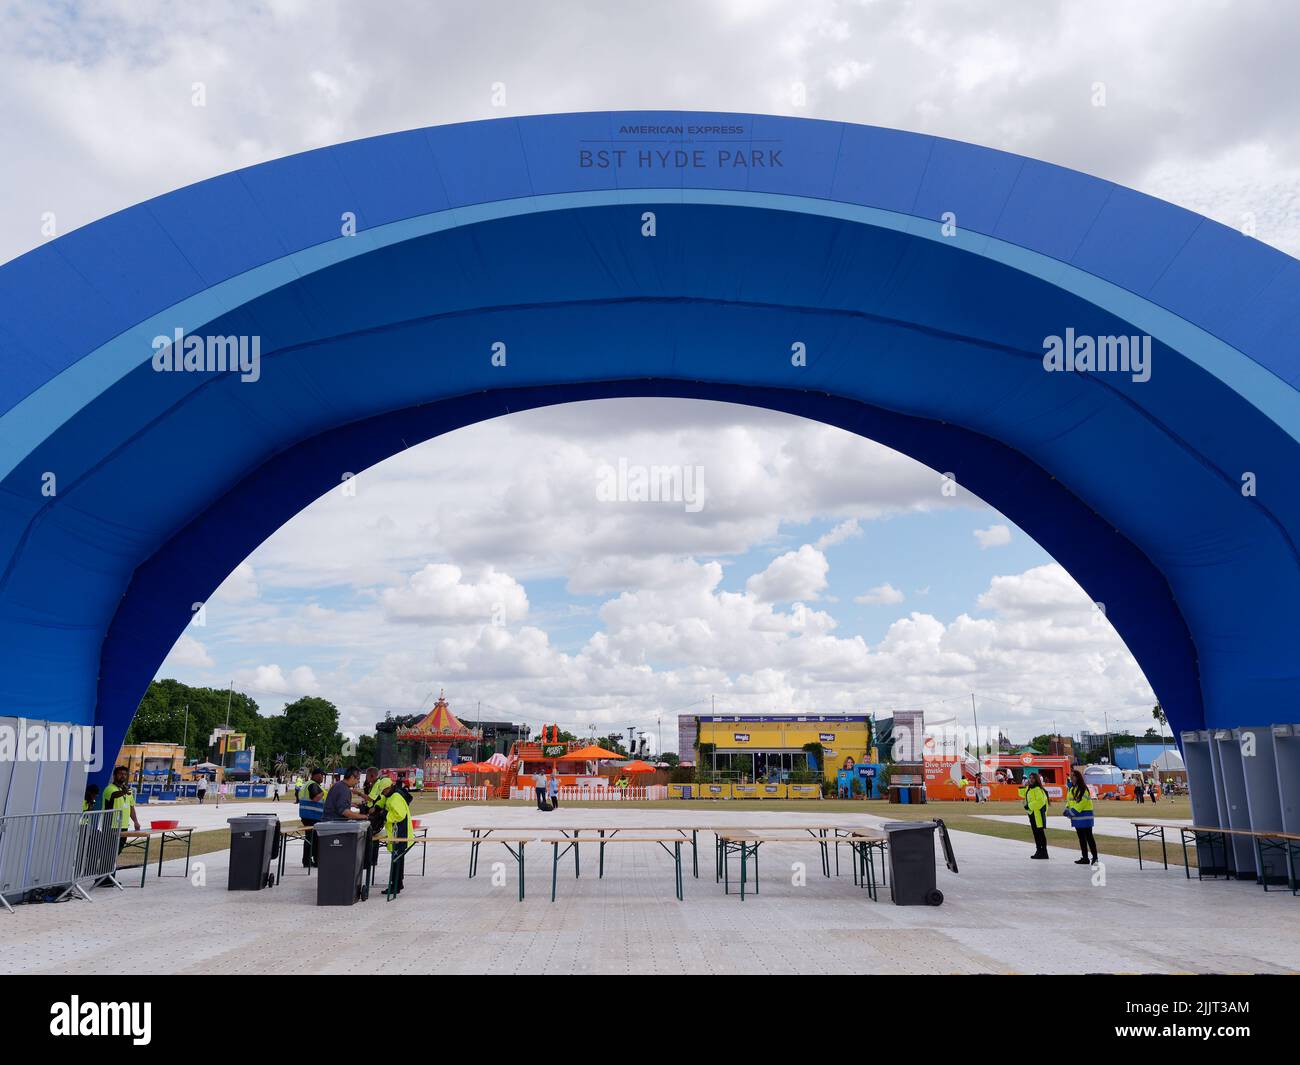 London, Greater London, England, June 30 2022: BST HYde Park concert arena entrance with blue arch and security checks. Fairground ride in the backgro Stock Photo